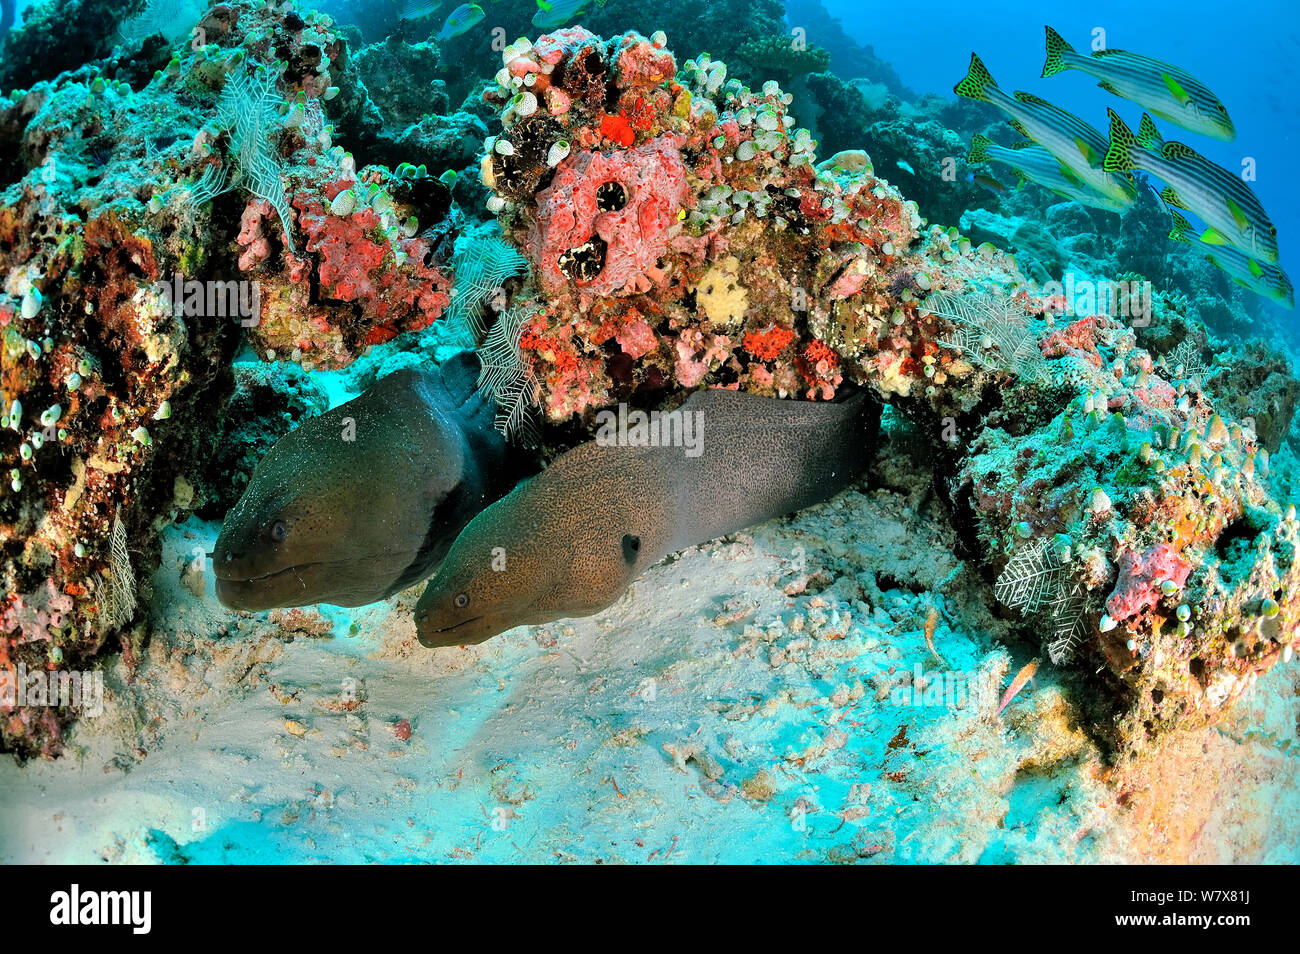 Two Giant morays (Gymnothorax javanicus) coming out of their burrows on coral reef, with Oriental sweetlips (Plectorhinchus orientalis) on background,  Maldives. Indian Ocean. Stock Photo